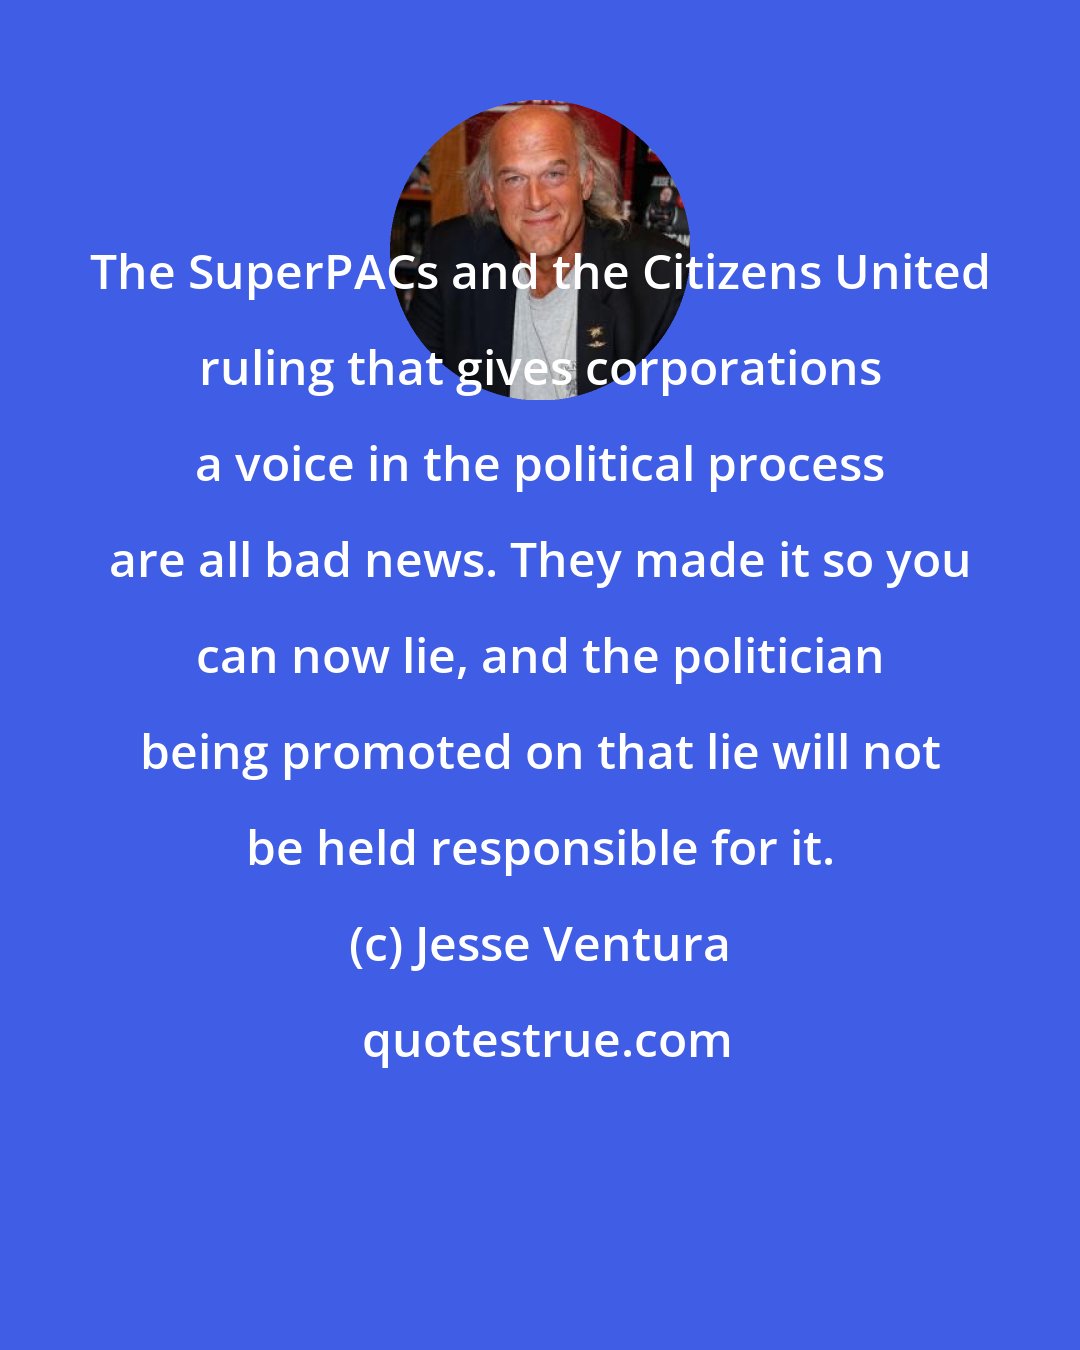 Jesse Ventura: The SuperPACs and the Citizens United ruling that gives corporations a voice in the political process are all bad news. They made it so you can now lie, and the politician being promoted on that lie will not be held responsible for it.